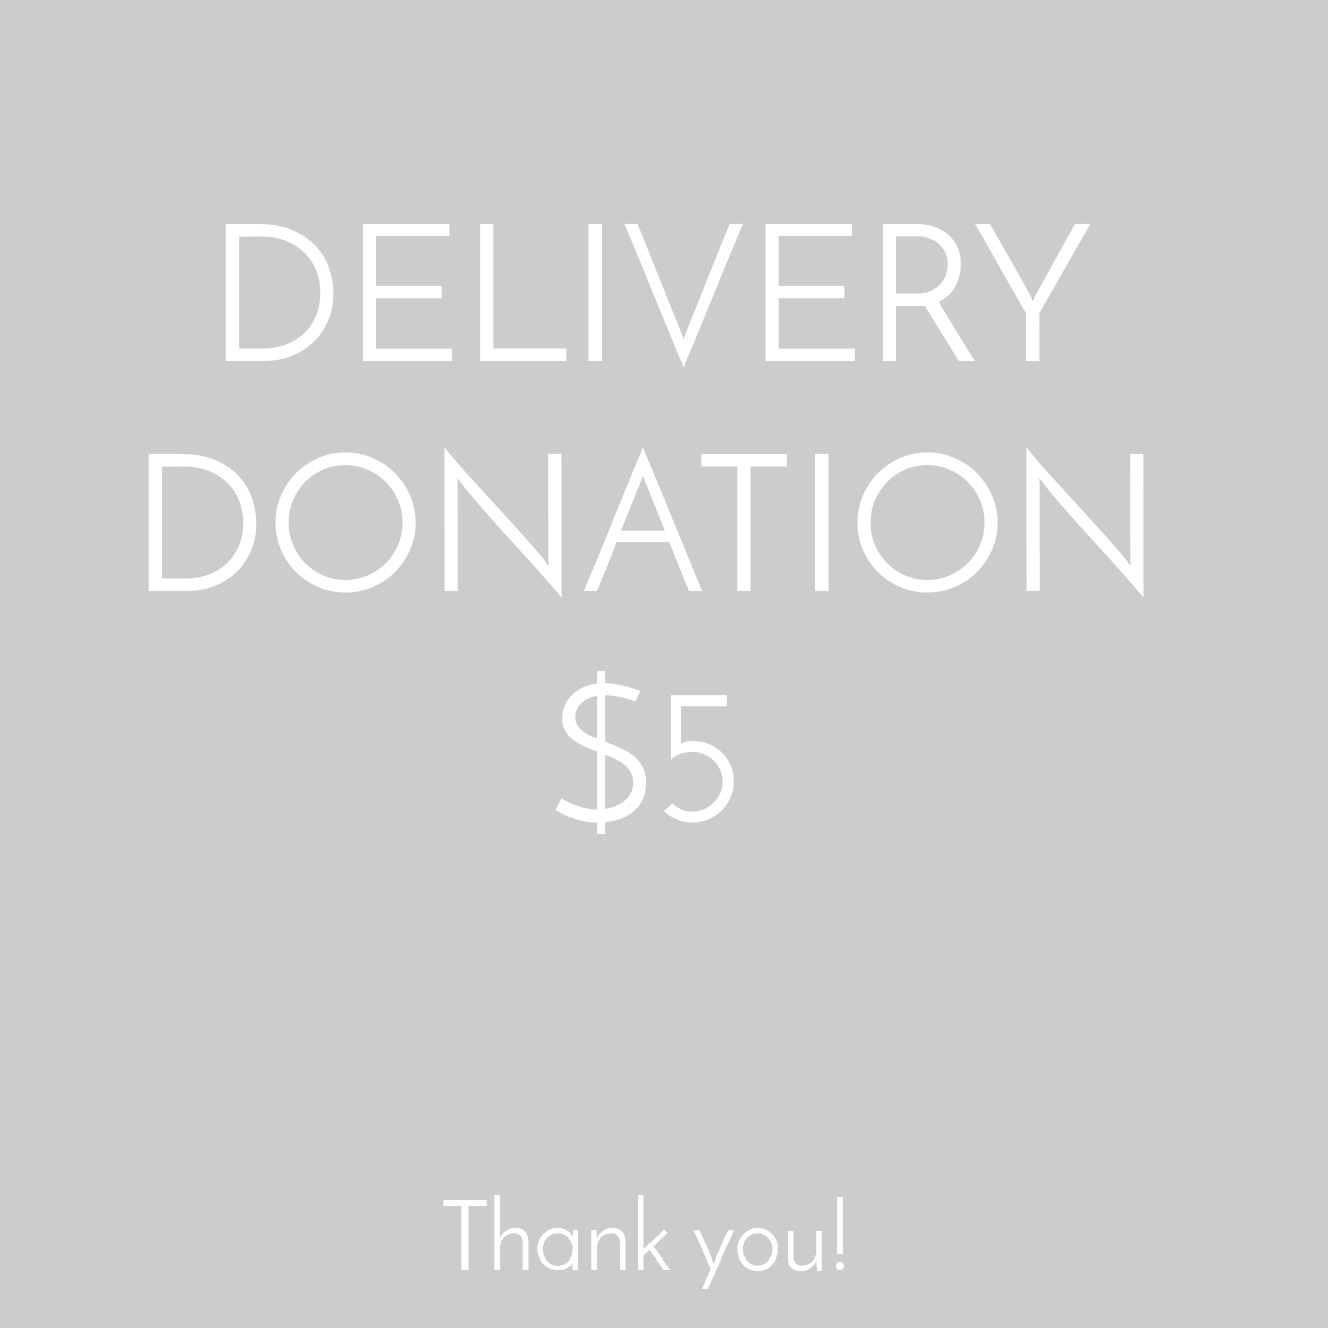 Delivery by Donation - $5